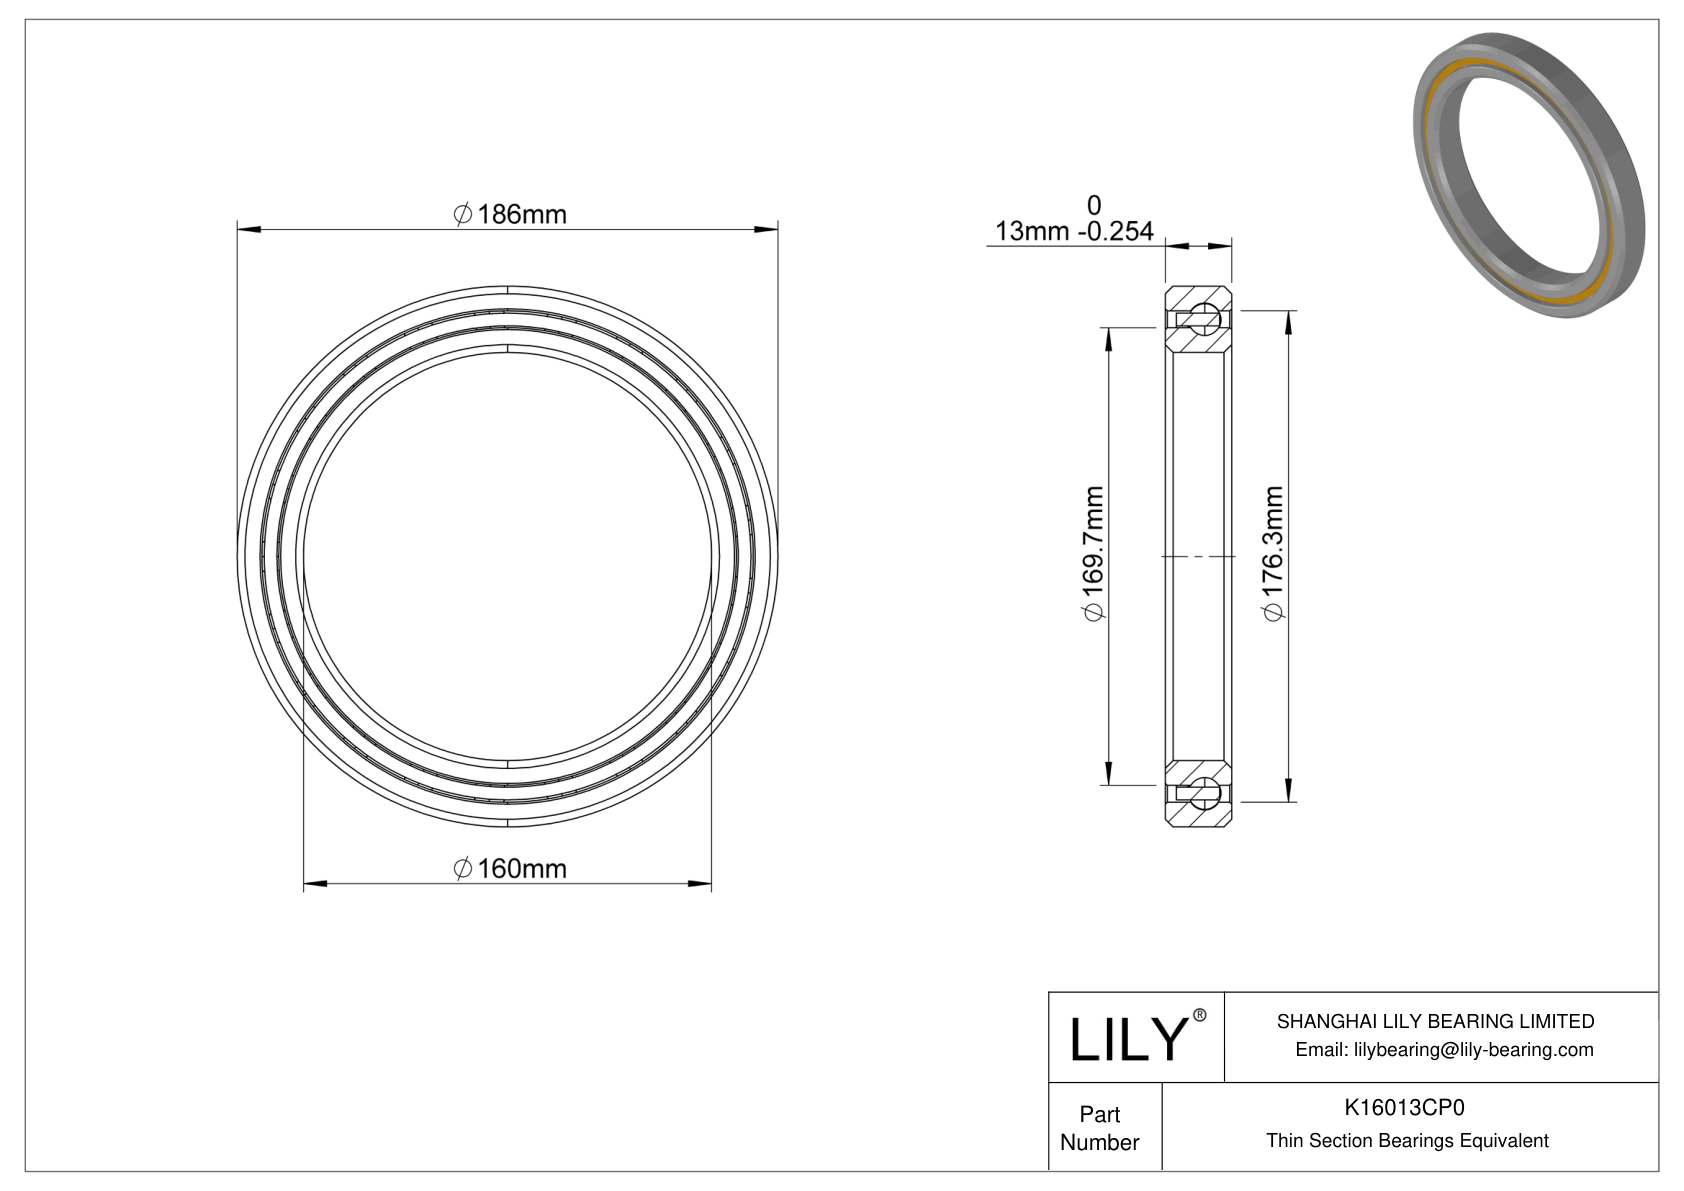 K16013CP0 Constant Section (CS) Bearings cad drawing